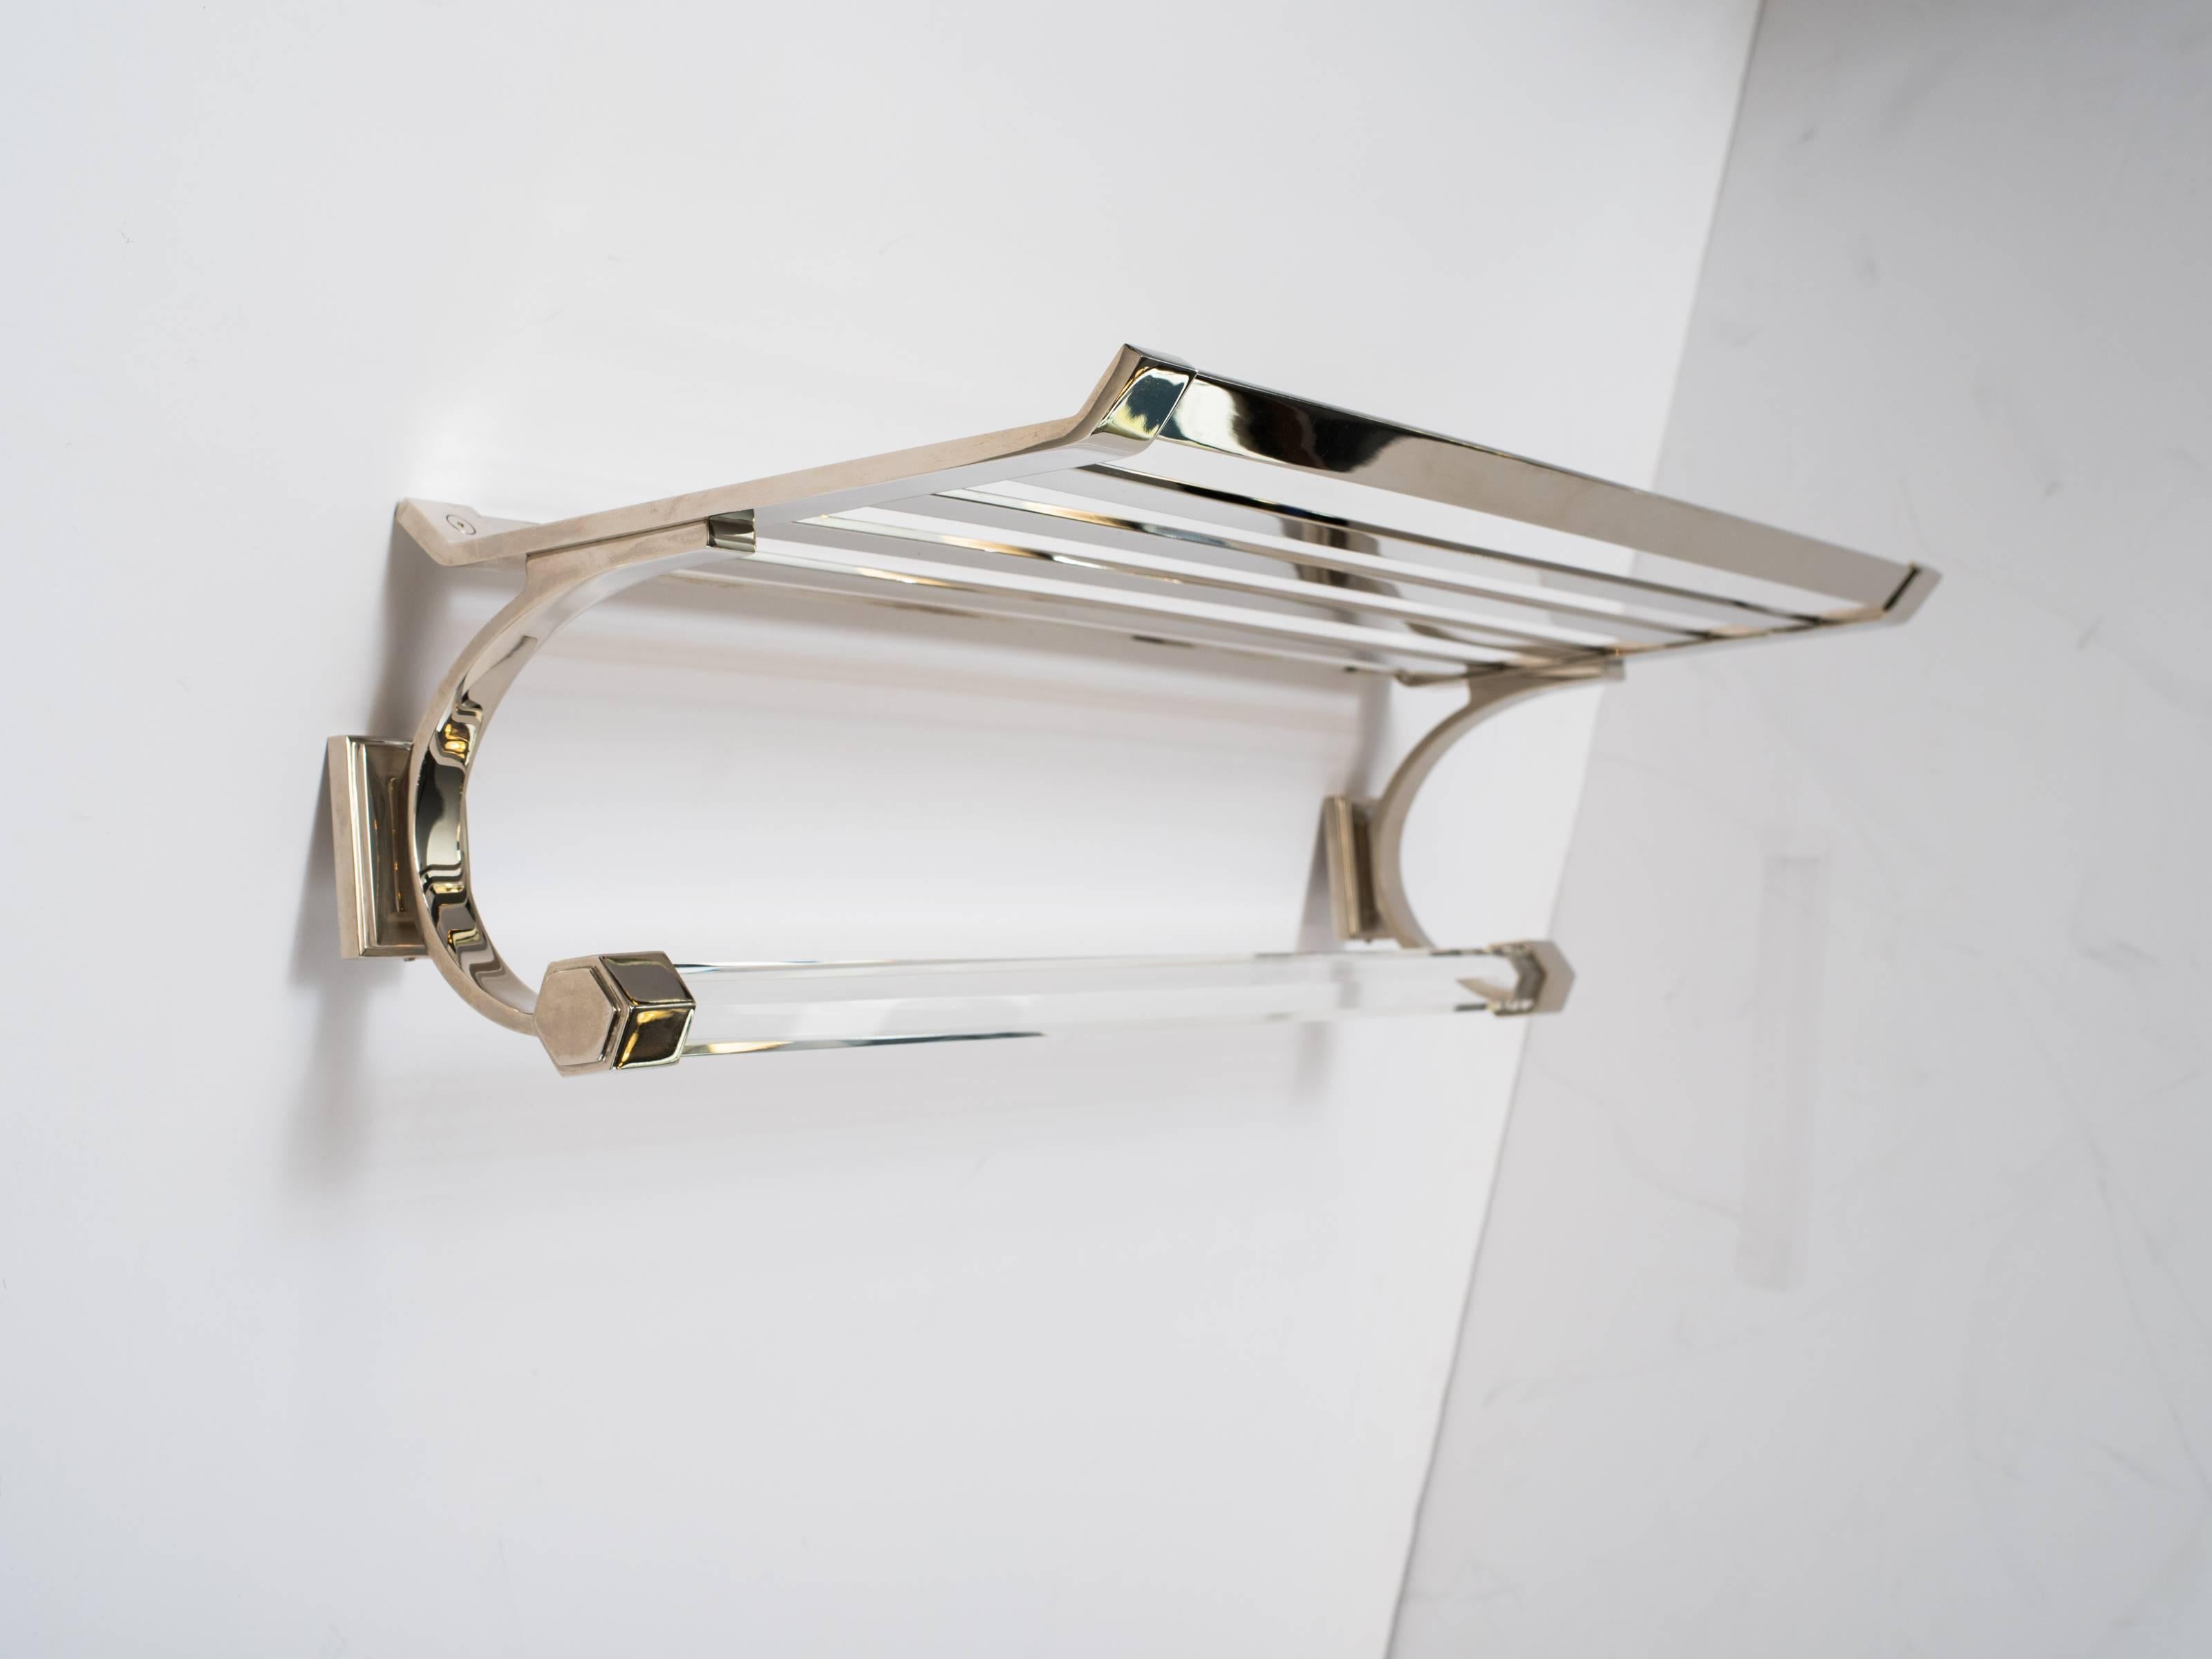 Modernist towel rack or bathroom shelf in polished nickel finish. The rack features a beautiful glass bar with faceted design, and a top rack with horizontal slats. Wall mount design rectangular backplates and curved sides with hexagon fittings.